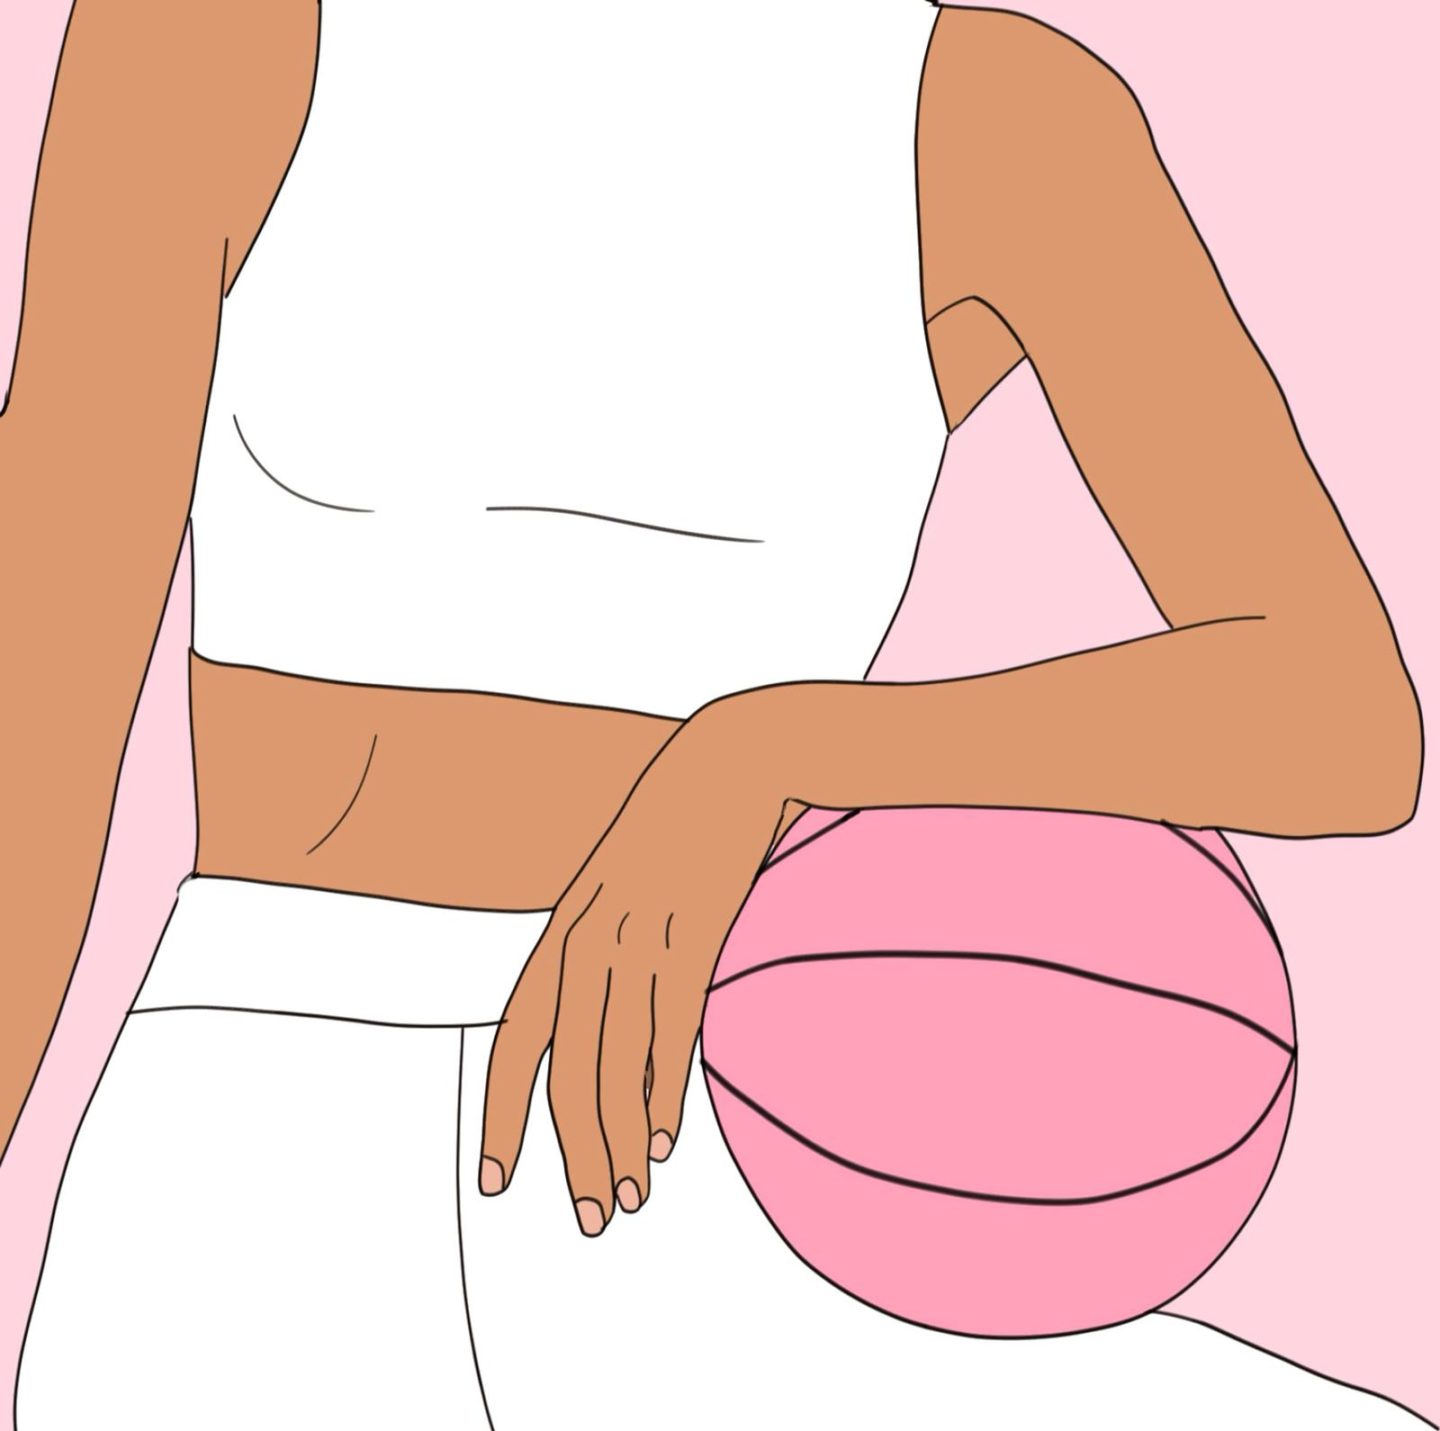 A girl basketball player trying to rid gender inequality in professional sports 